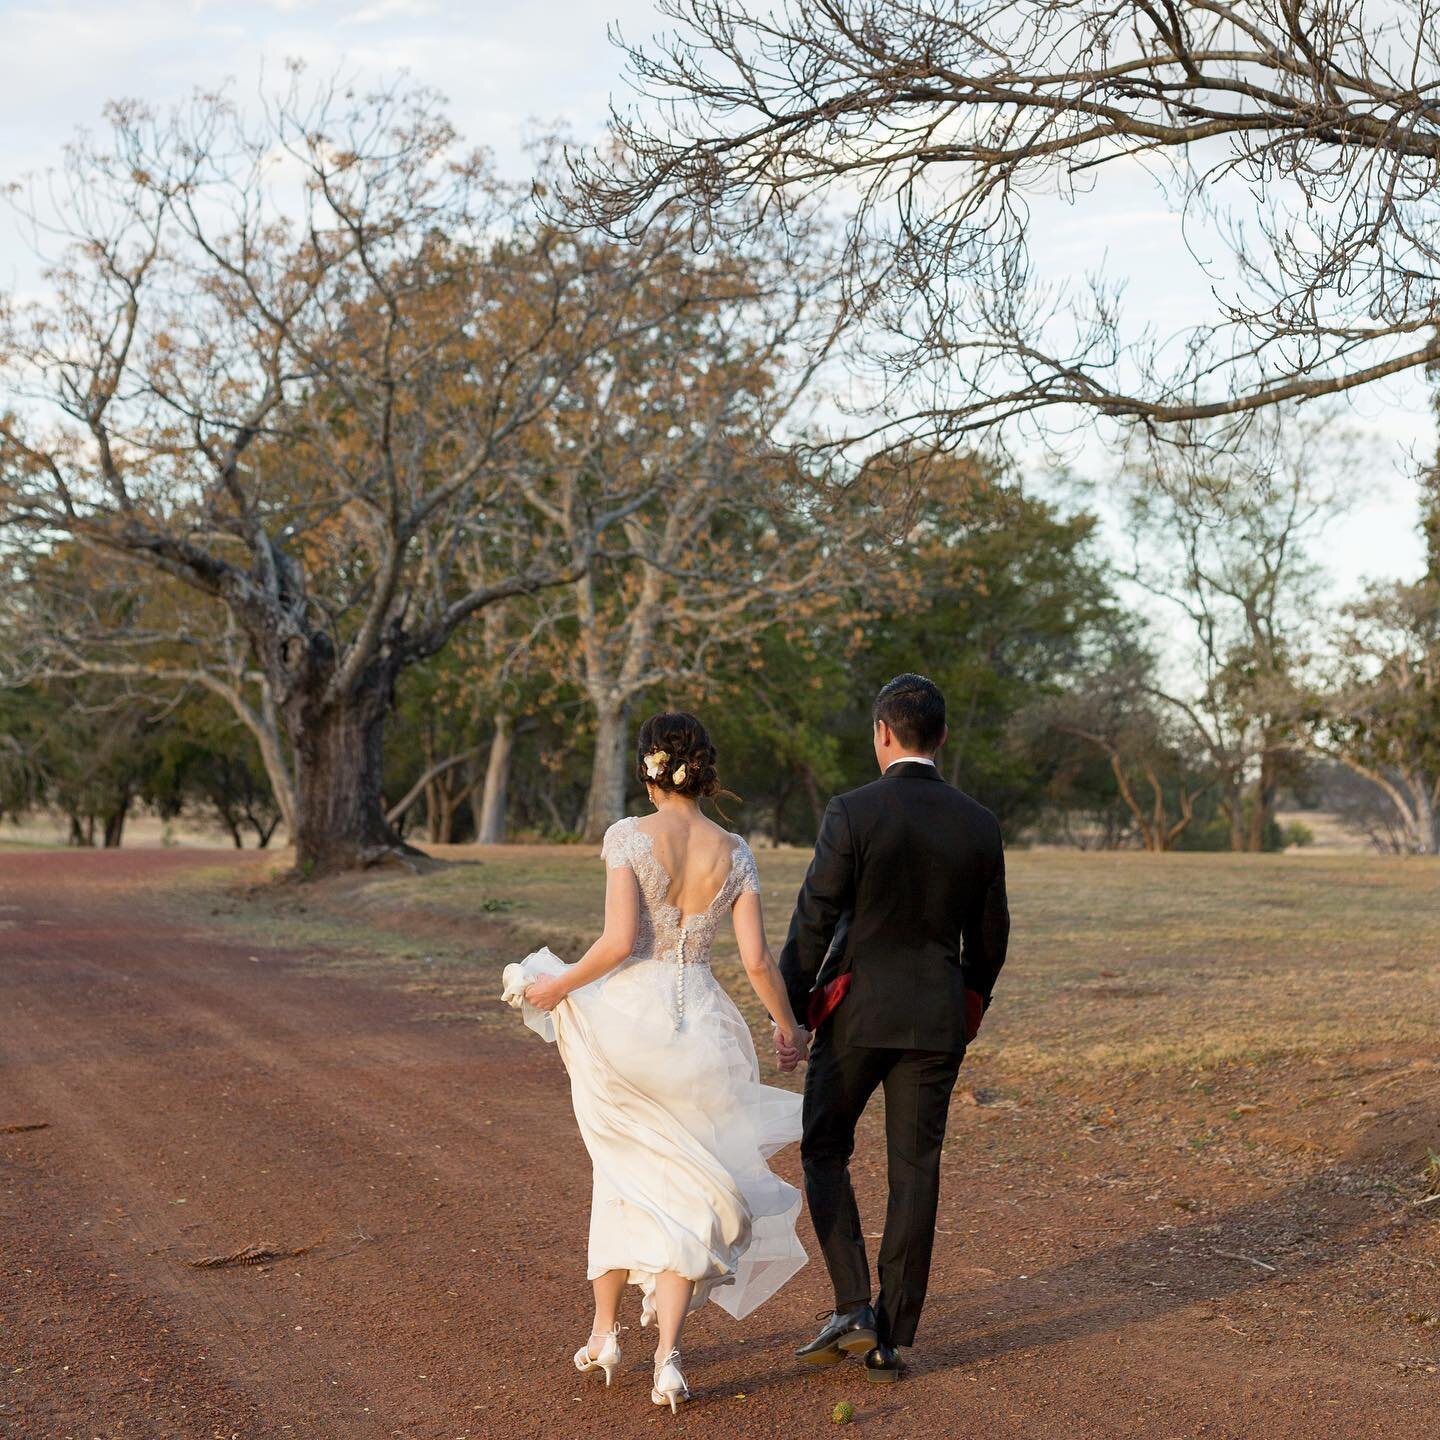 We love incorporating the natural environment and landscapes into our images. We are so blessed to live in such a beautiful part of this country. 

Dress- @moirahughescouture

#australianlandscape
#ruralweddings
#southeastqld
#qldweddingphotographer
